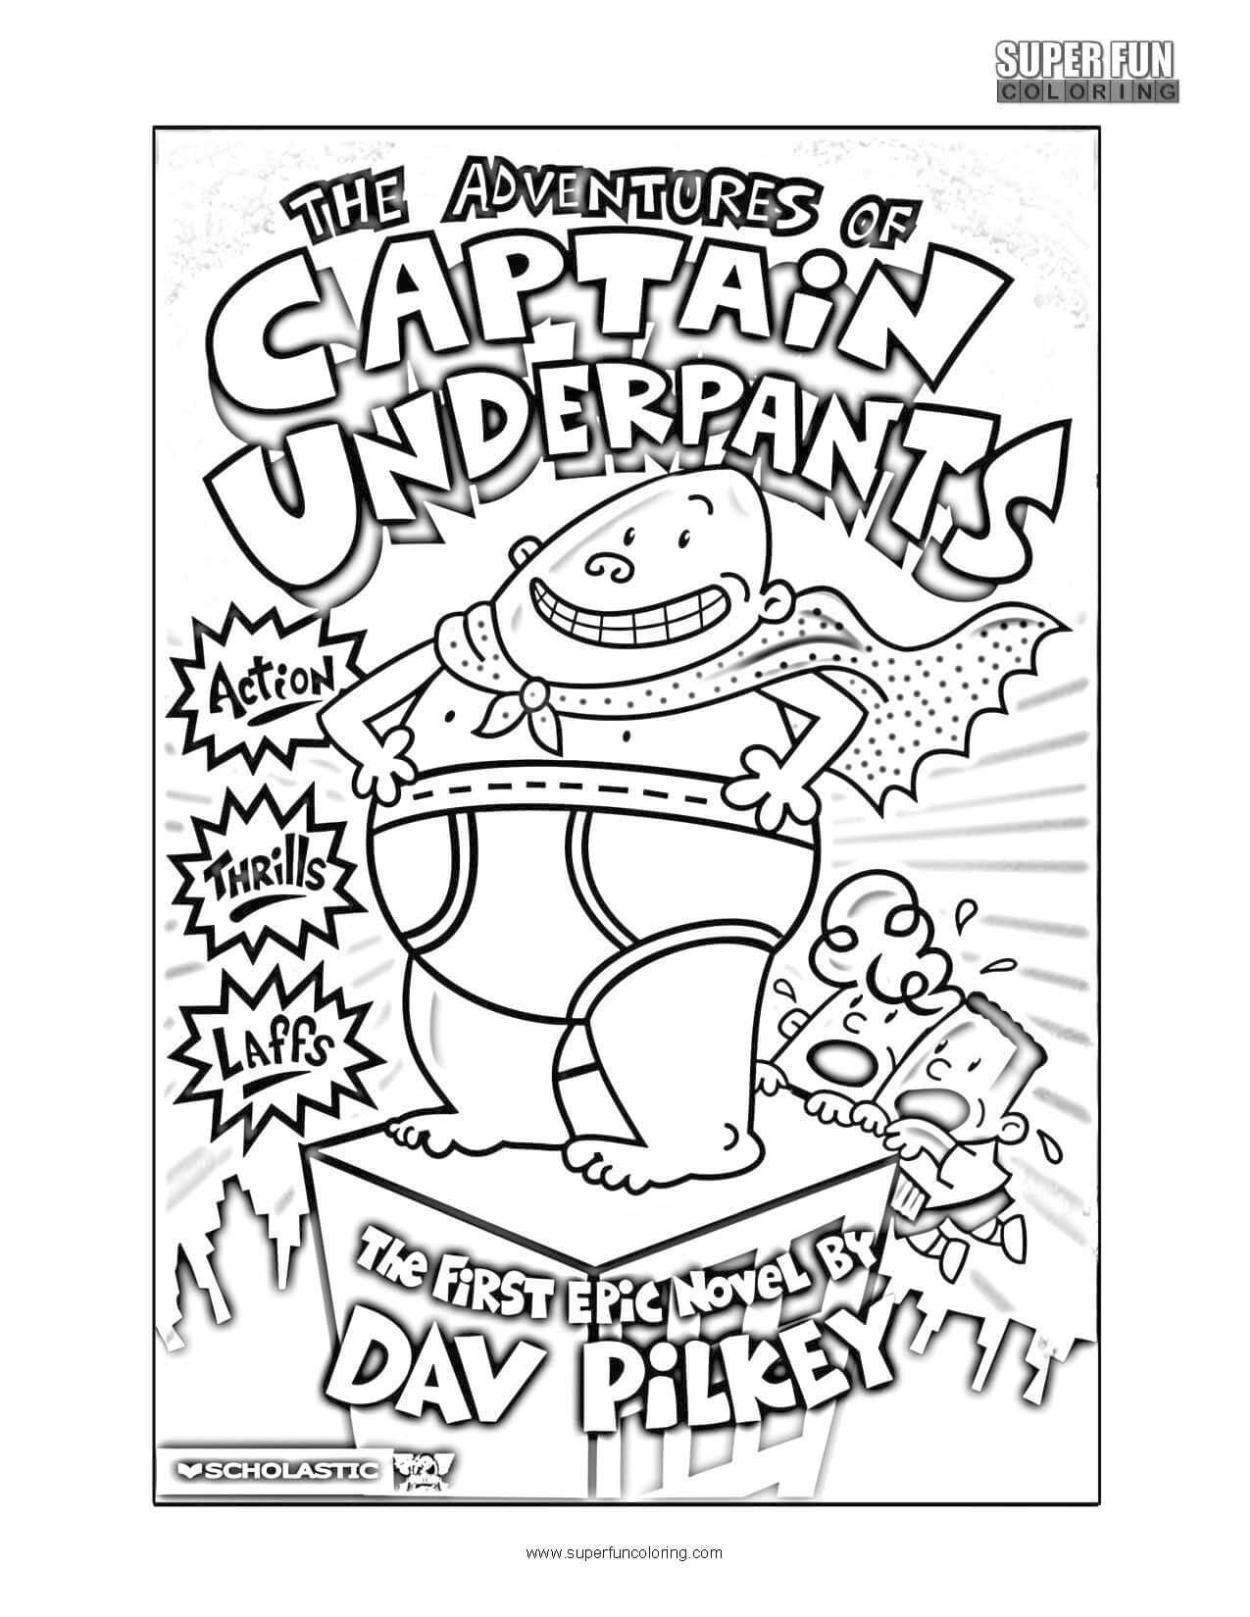 20+ Free Printable Captain Underpants Coloring Pages - EverFreeColoring.com